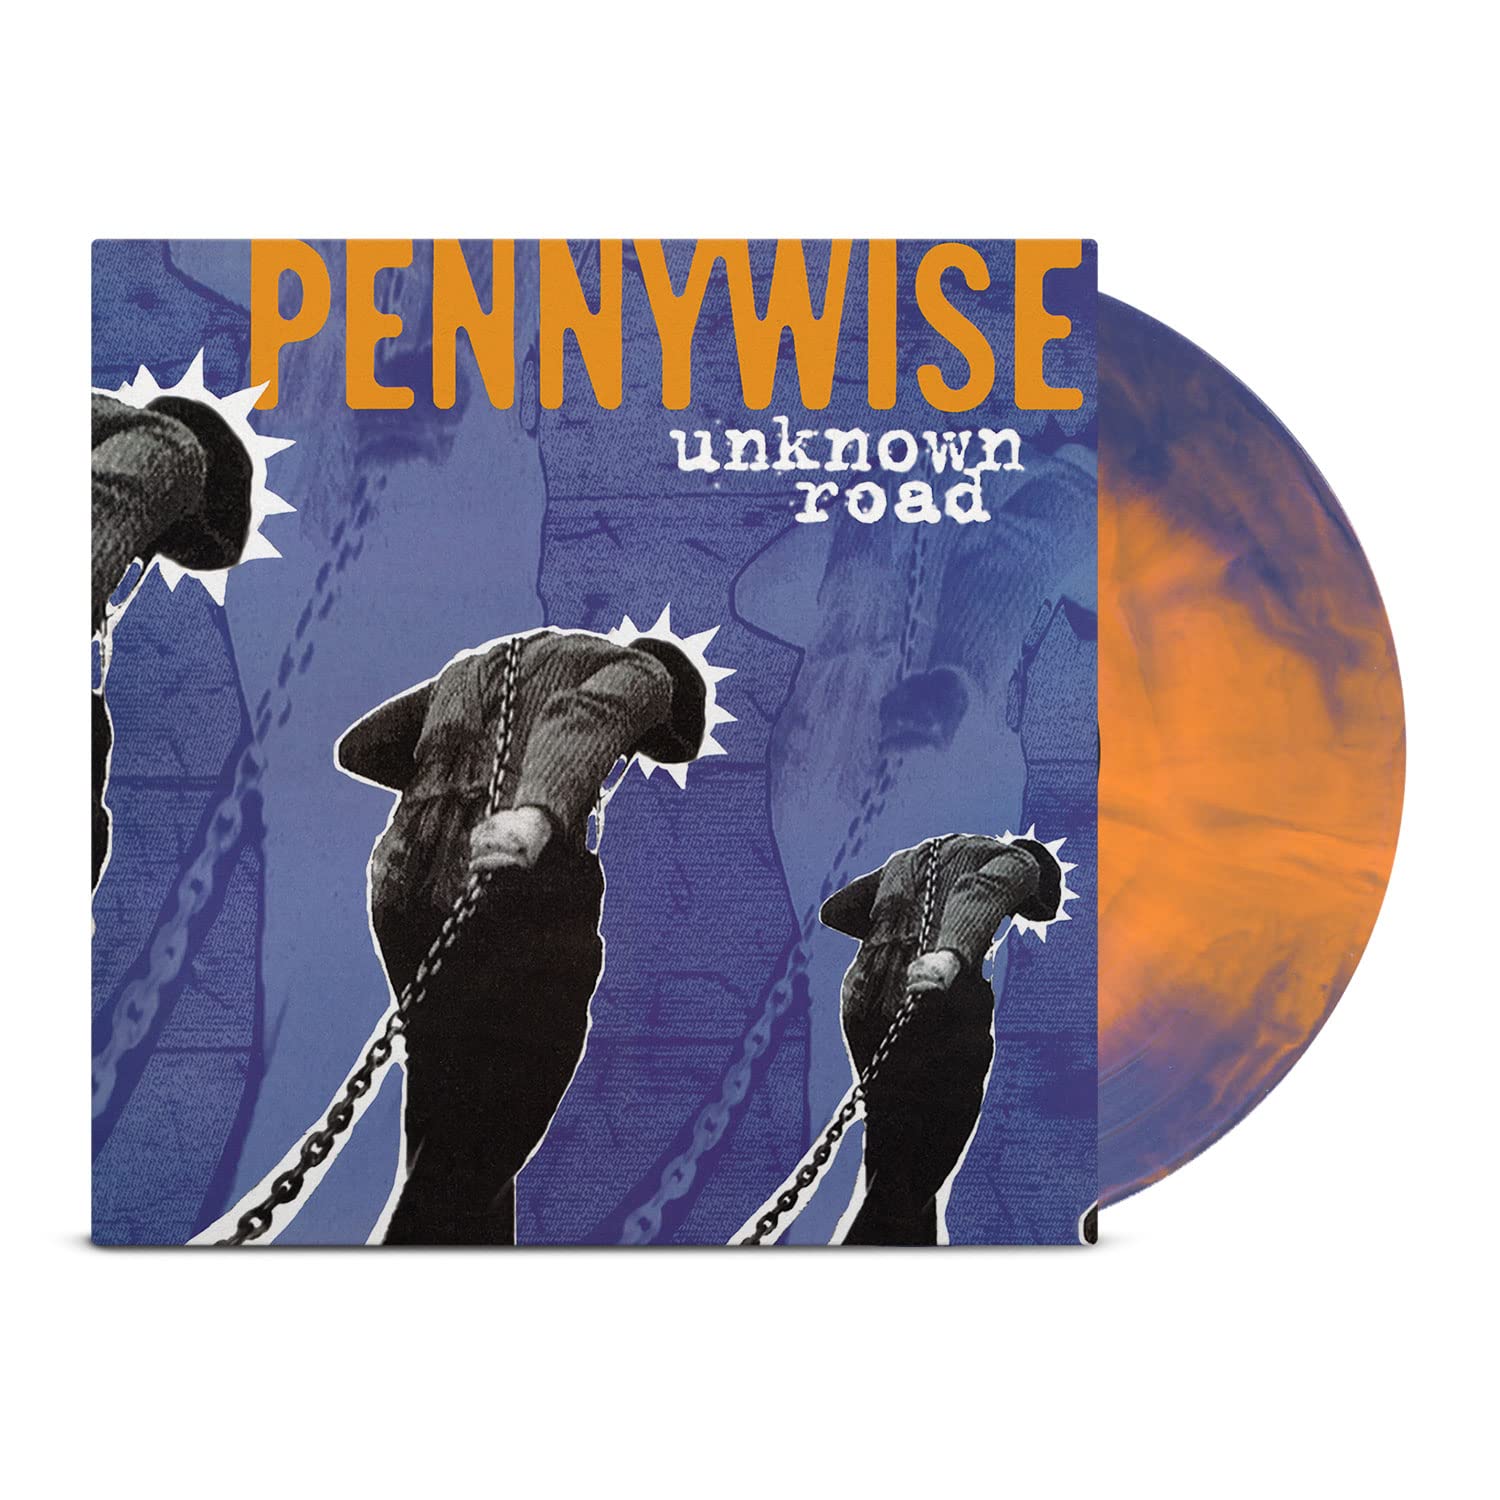 Pennywise - Unknown Road. Ltd Anniversary Edition LP.